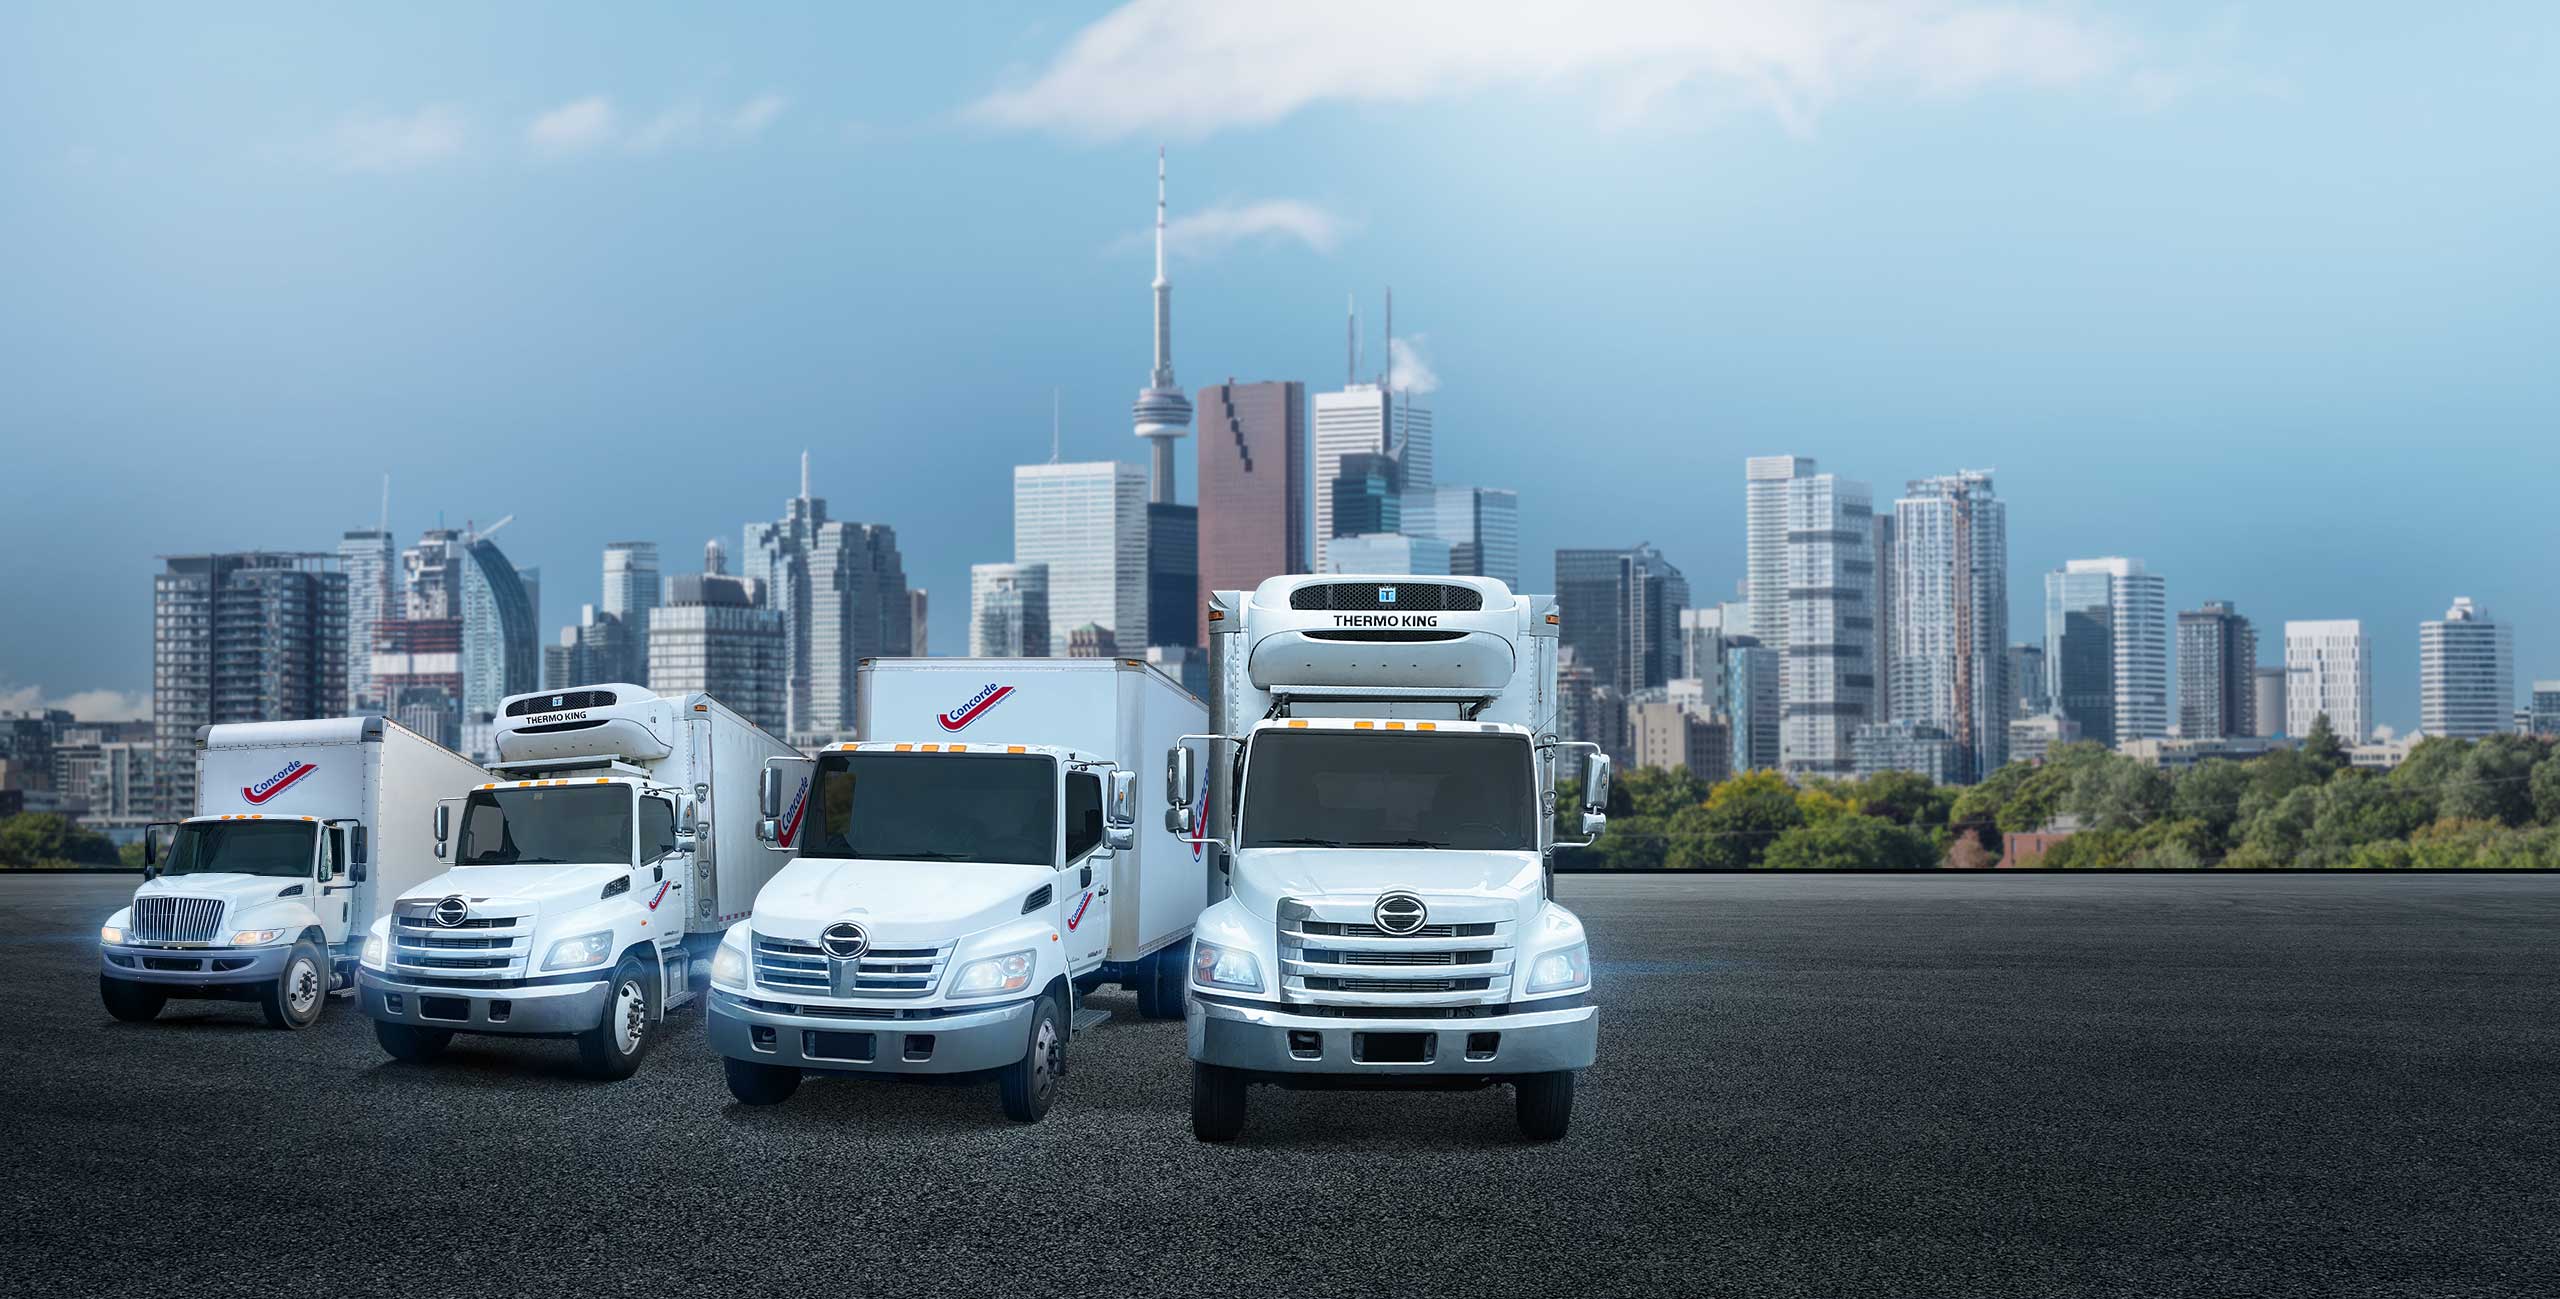 Concorde city truck, reefer, straight truck and second reefer in front of Toronto cityscape